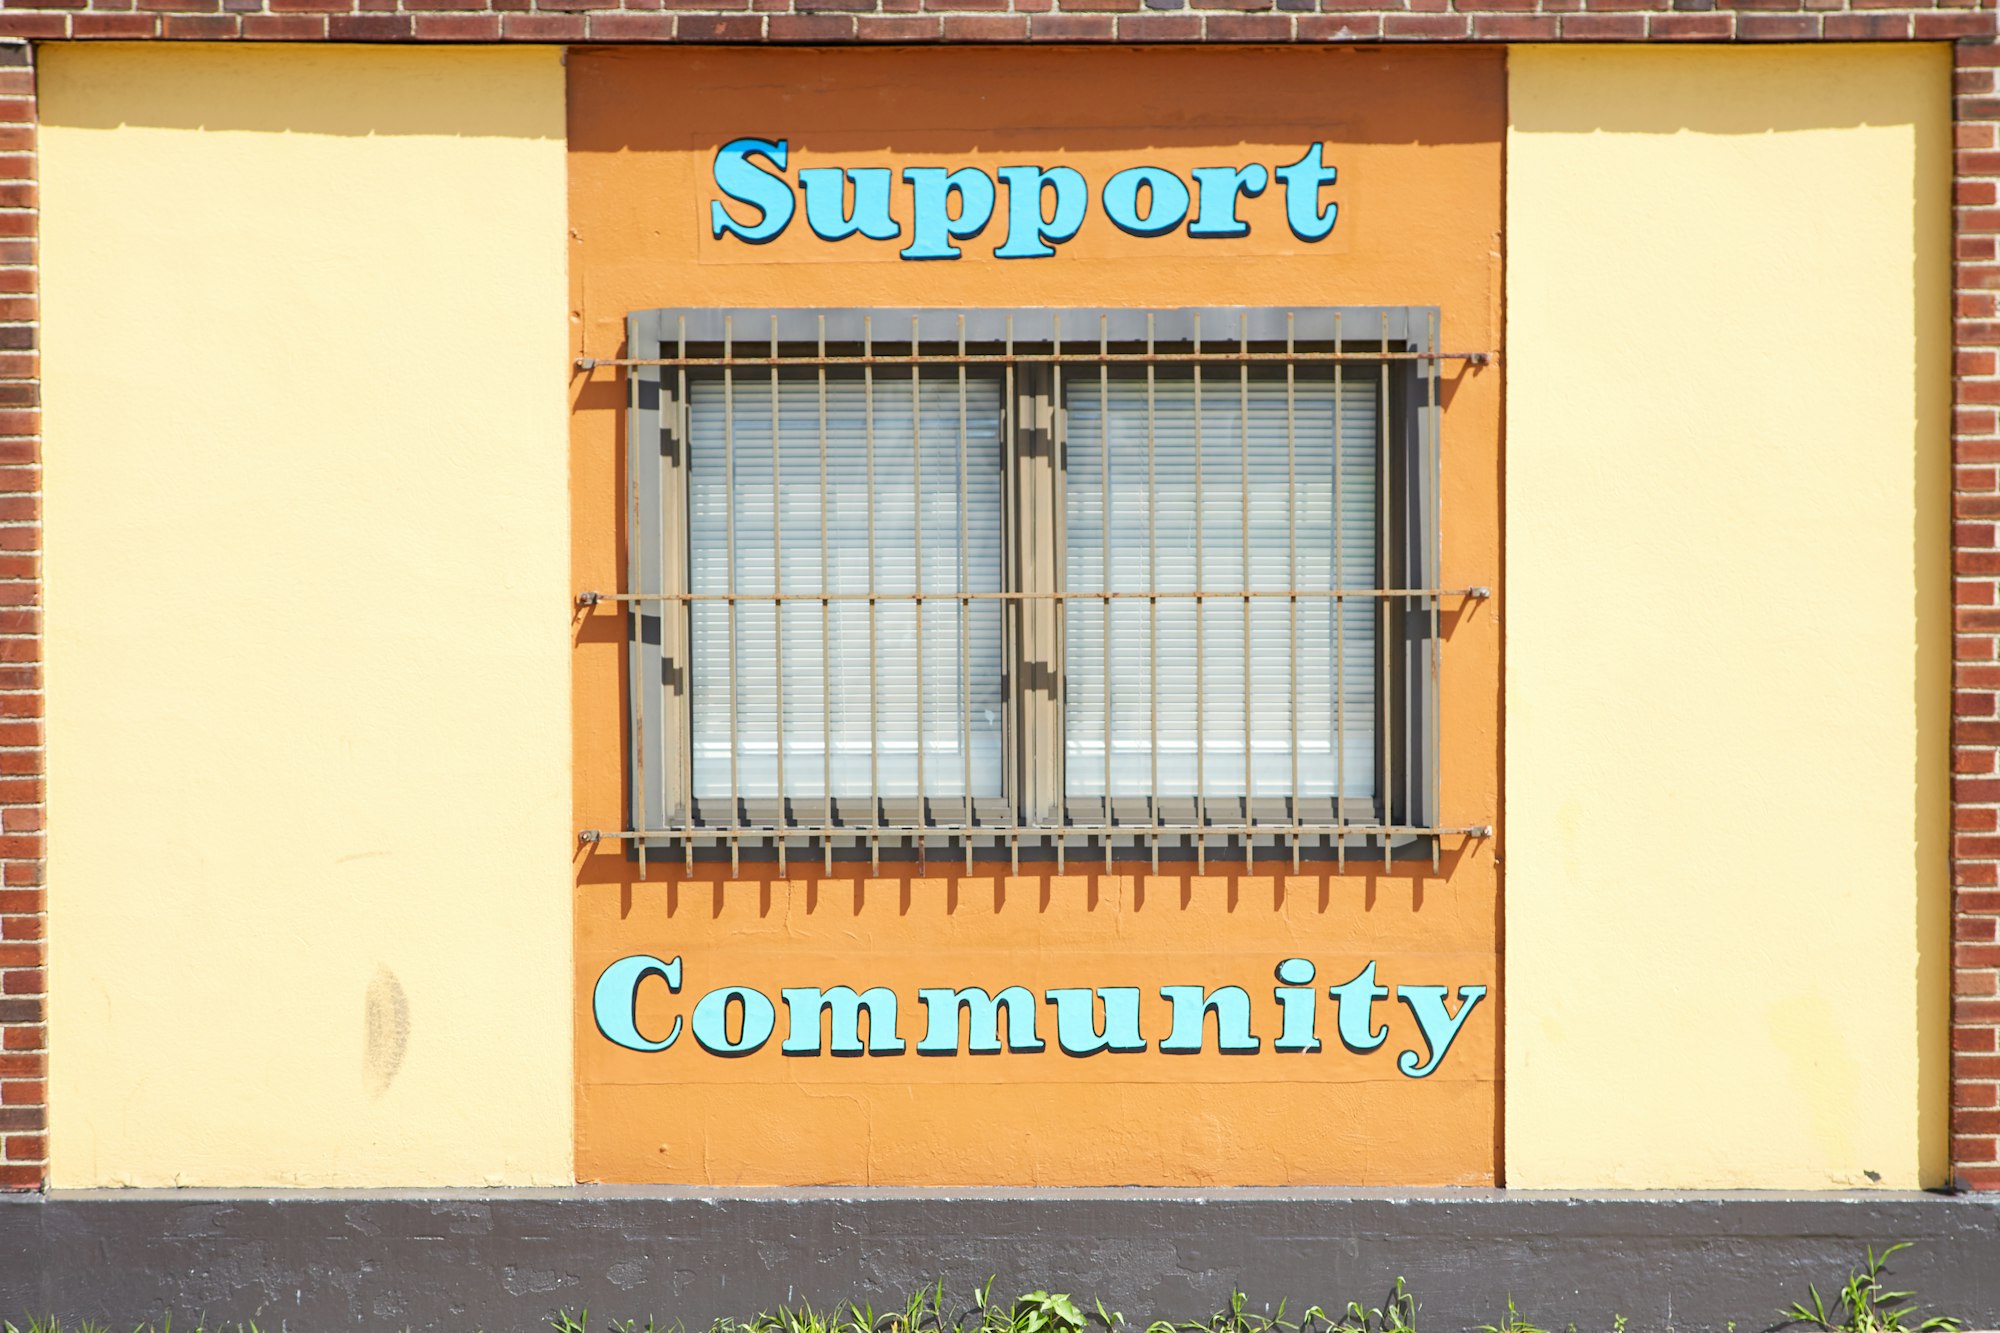 I pass by this building everyday to work.  I always thought it was a bit sad the message of ‘support’ and ‘community’ was around the steel bar window.